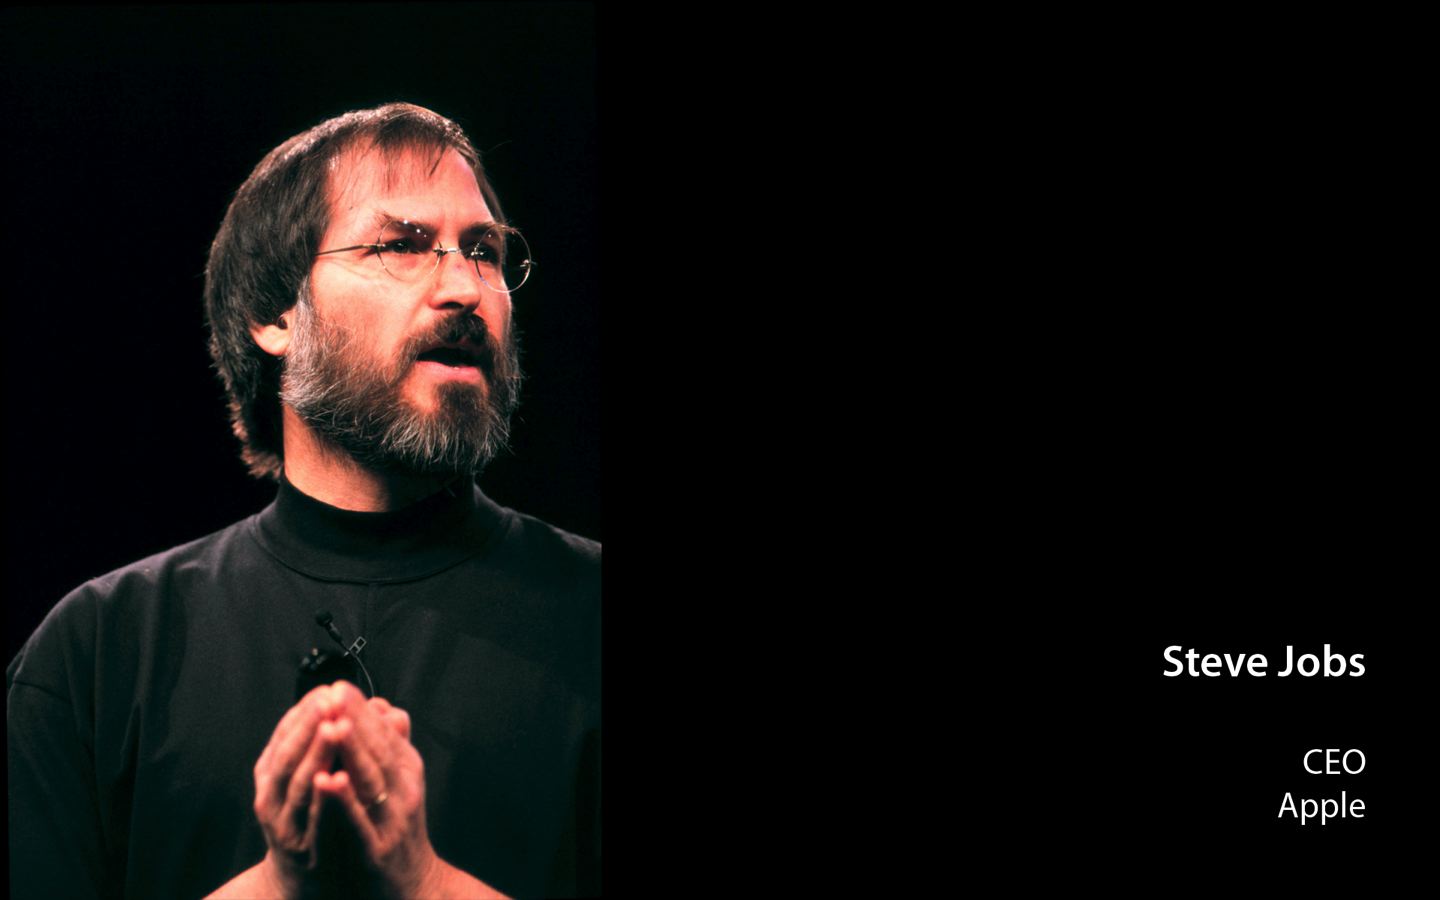 Steve Jobs Biography And Photos Famous People